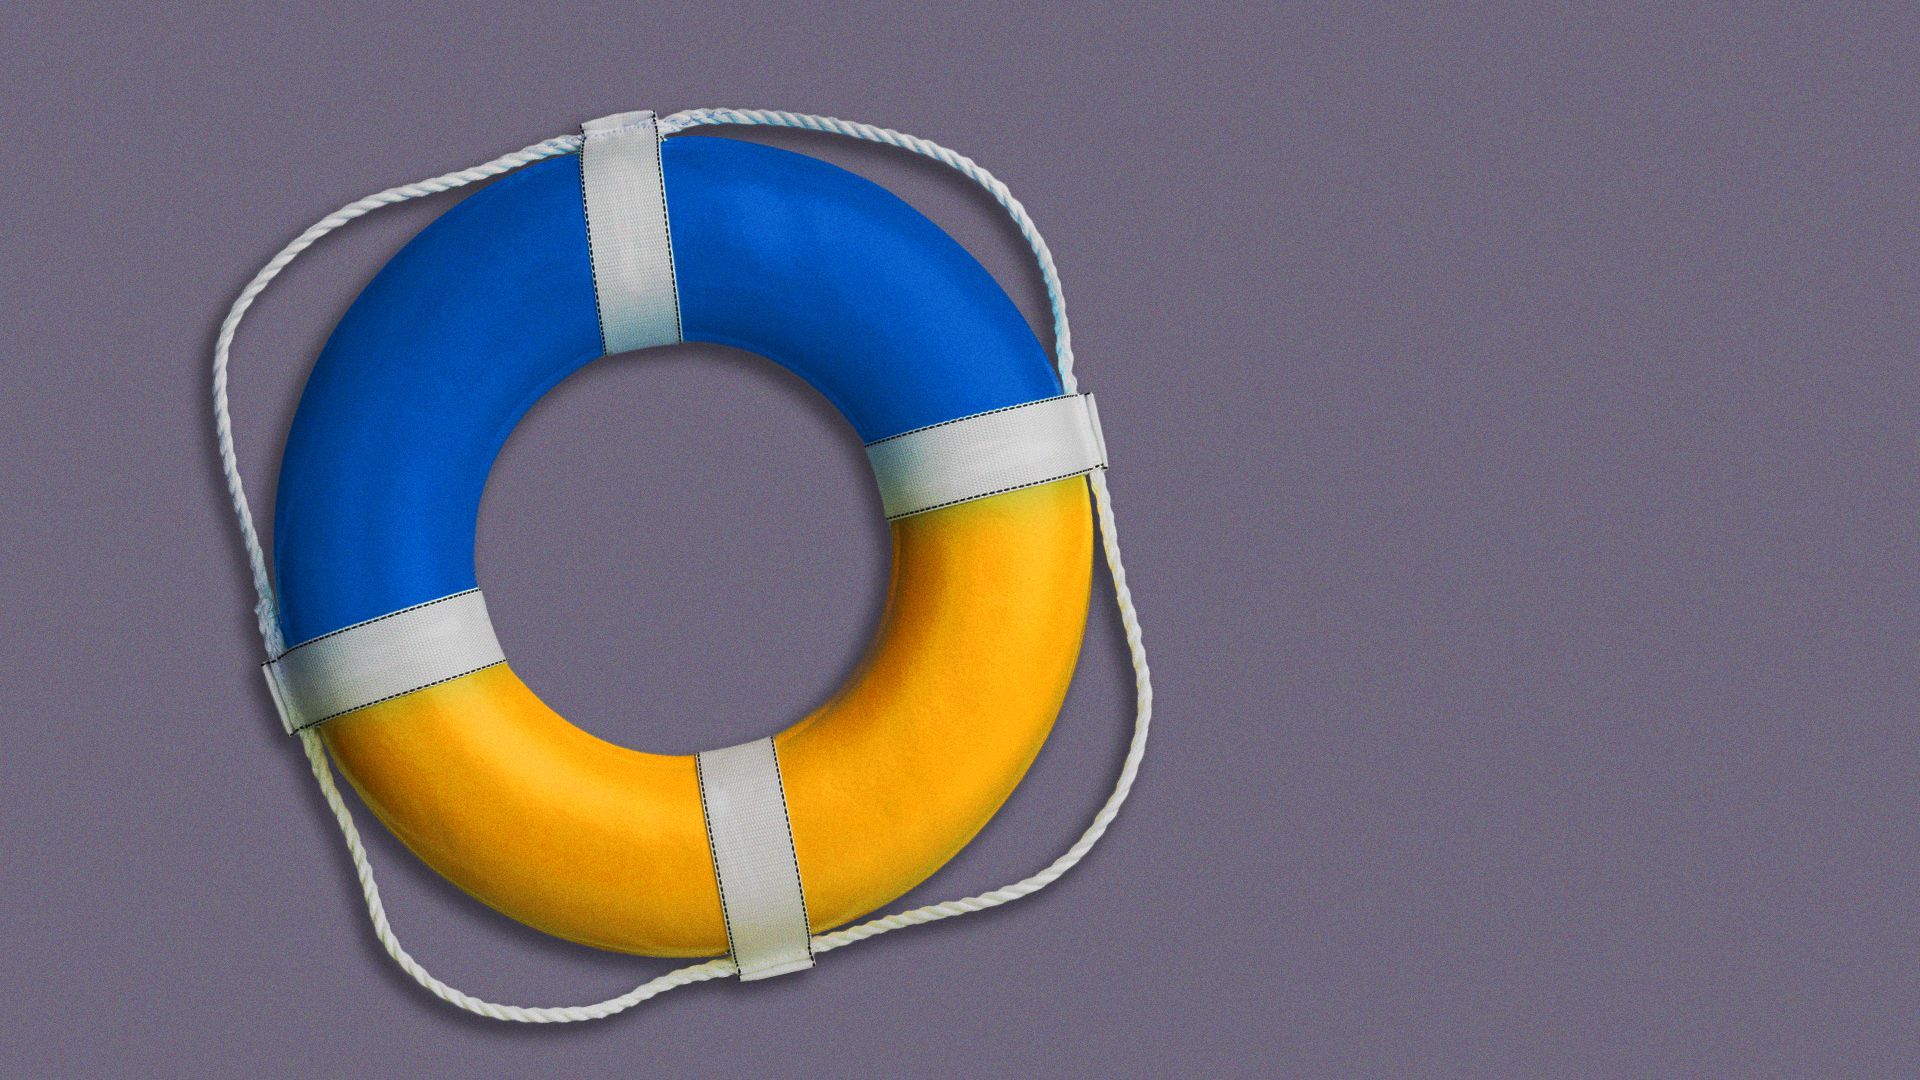 Illustration of a life preserver in the colors of the Ukrainian flag.